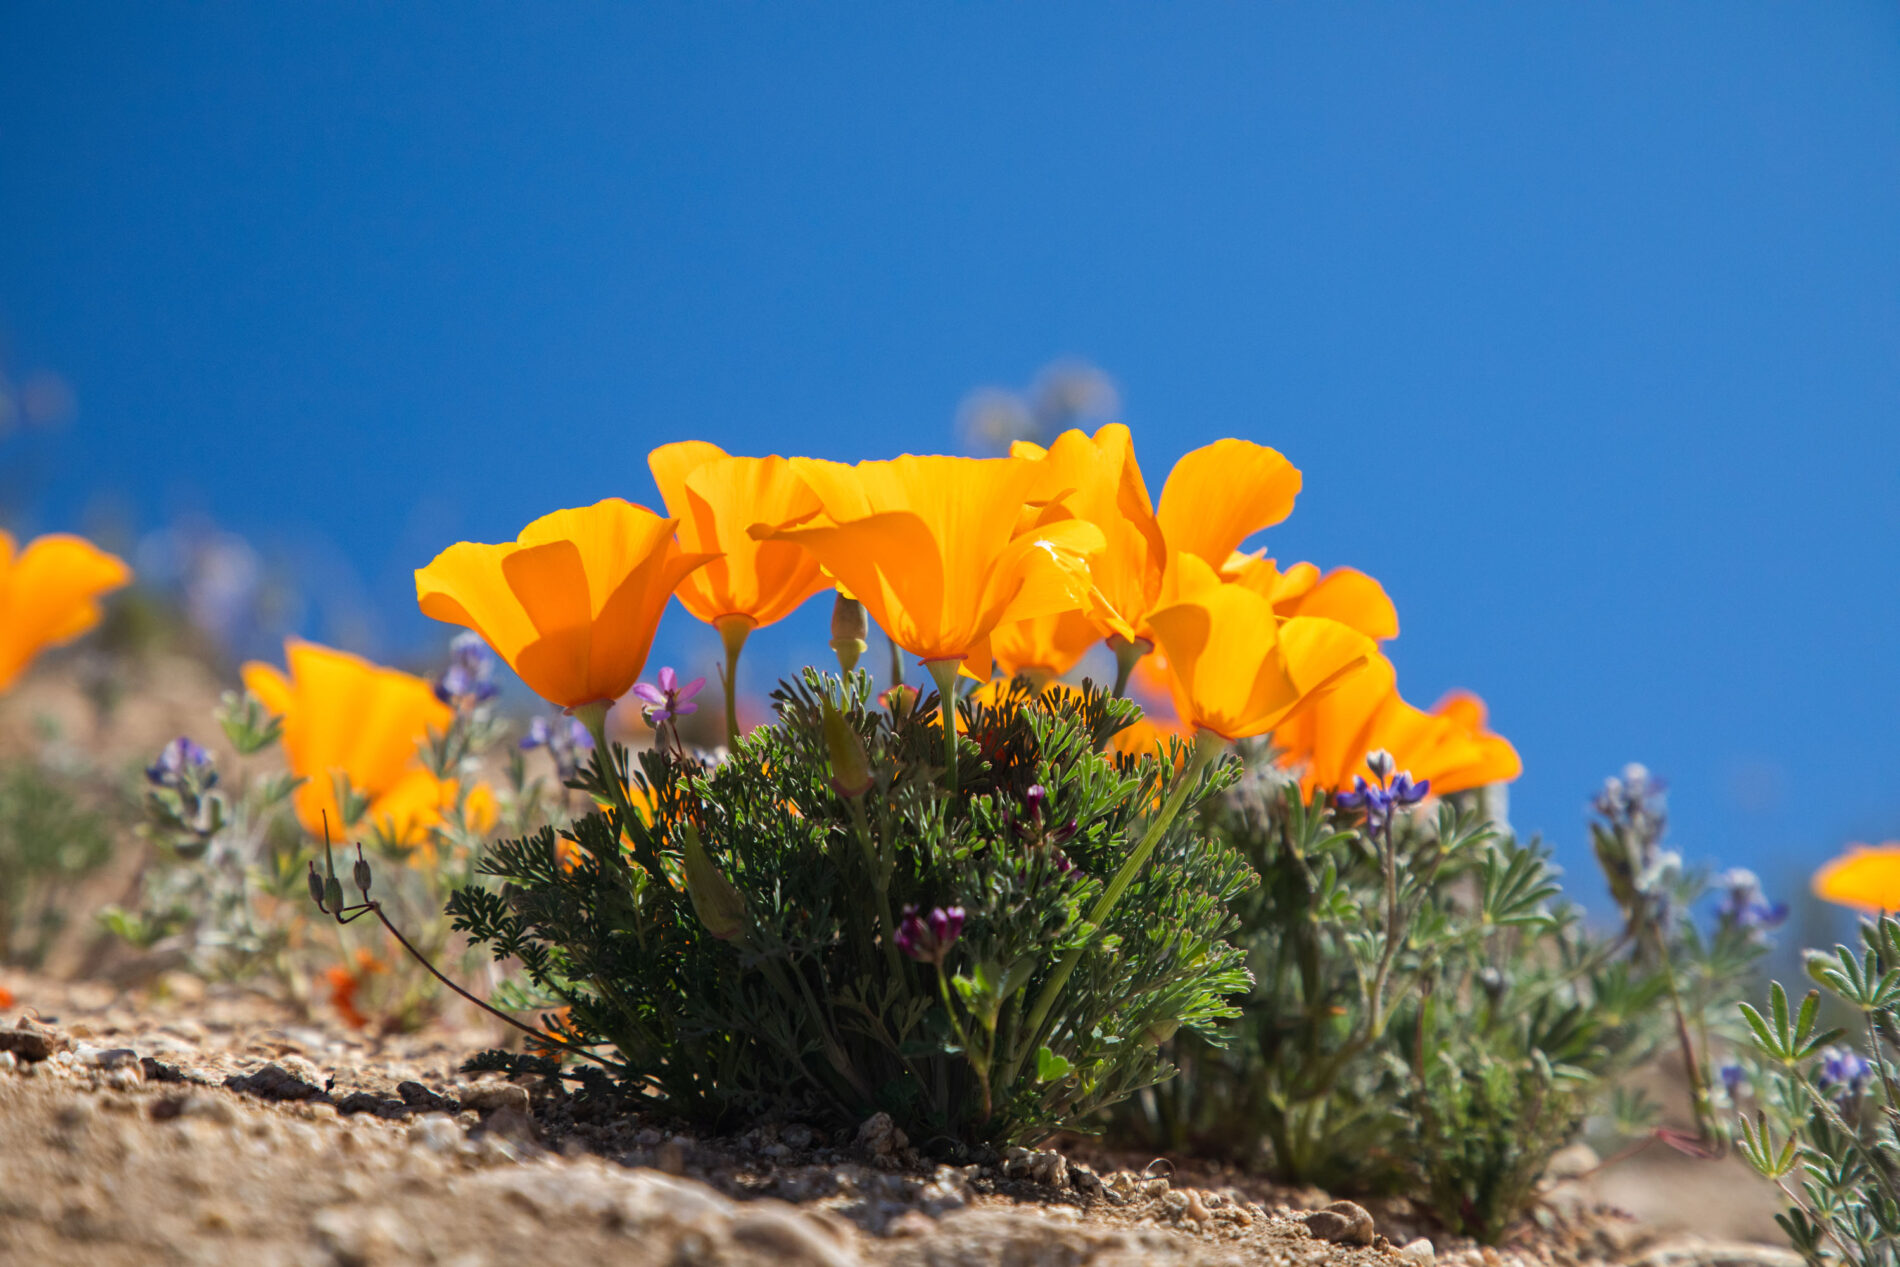 Golden poppies create a vivid contrast with the clear blue California skies.